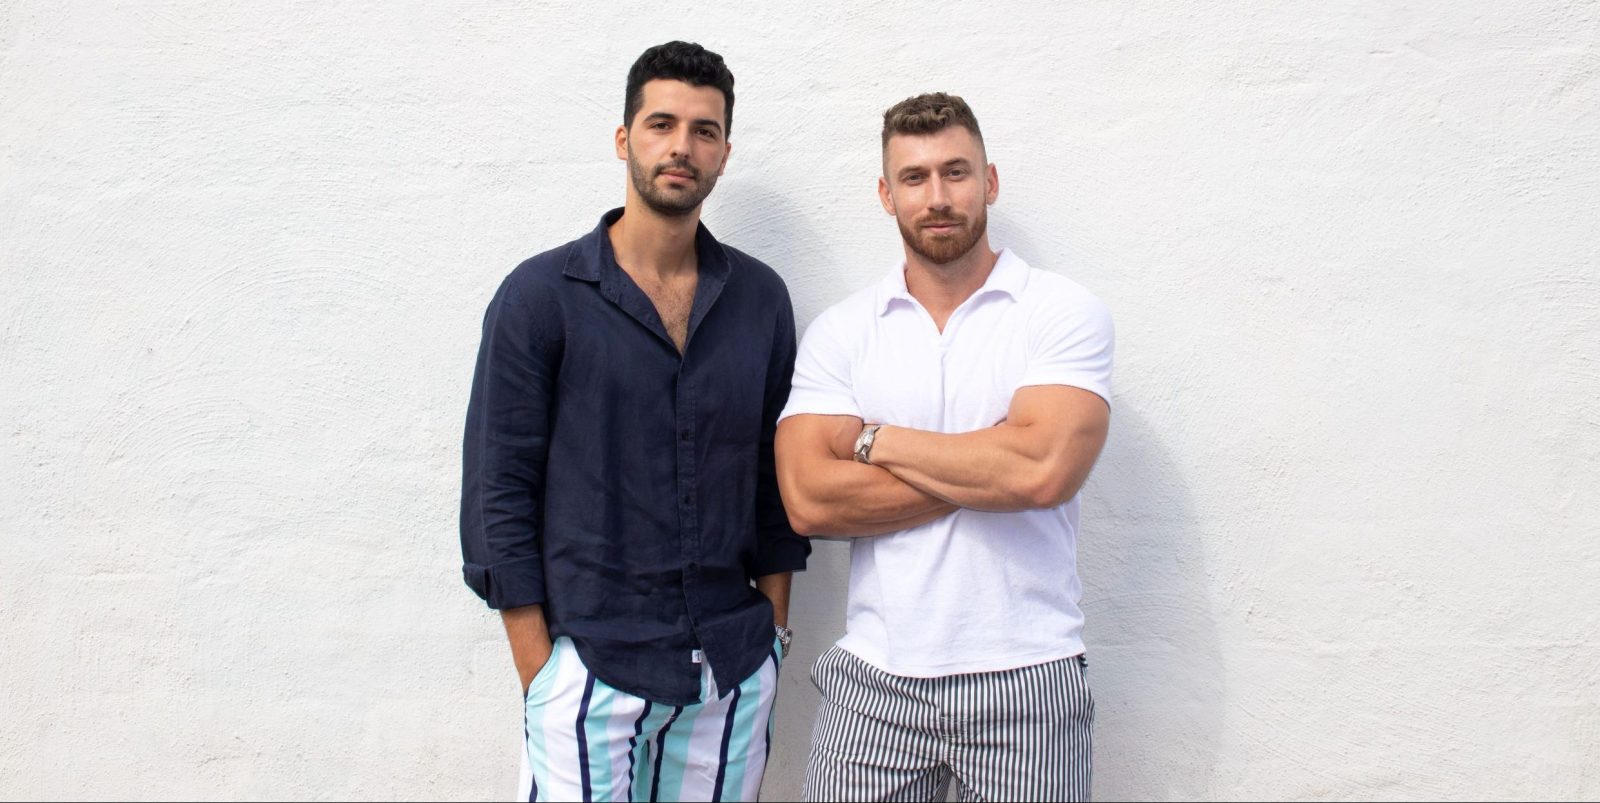 Vacay Swimwear launched in early 2017 by founders Jordy Kallios (right) and Corey Decandia (left), both from Adelaide, South Australia.